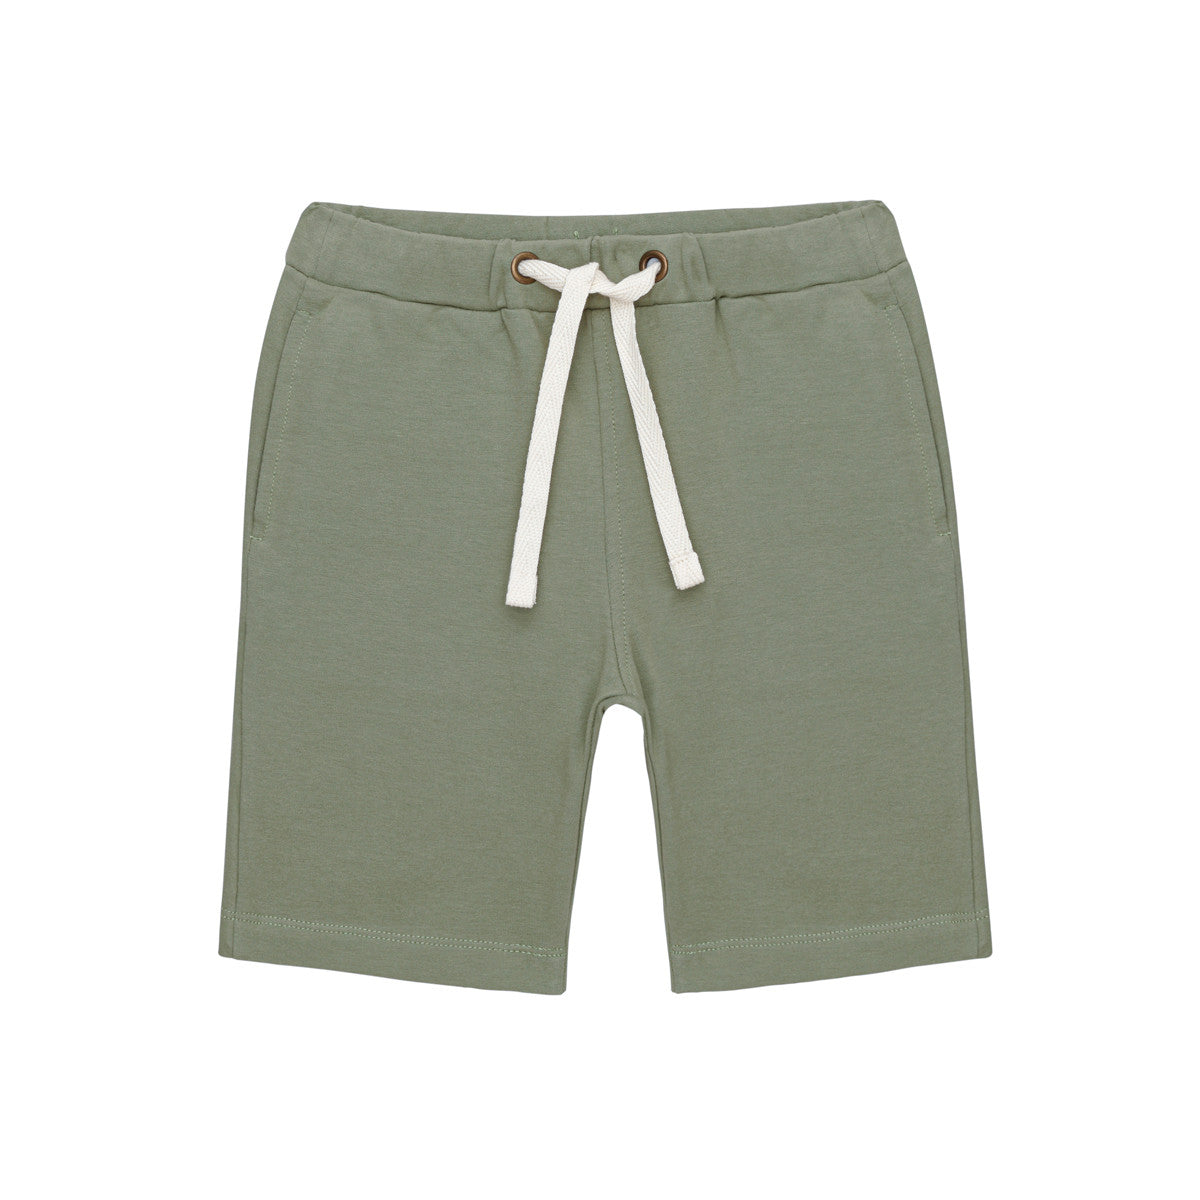 Little Hedonist super comfy organic surfer shorts in Oil Green made from our softest organic cotton. Sustainable kids clothing for boys and girls.